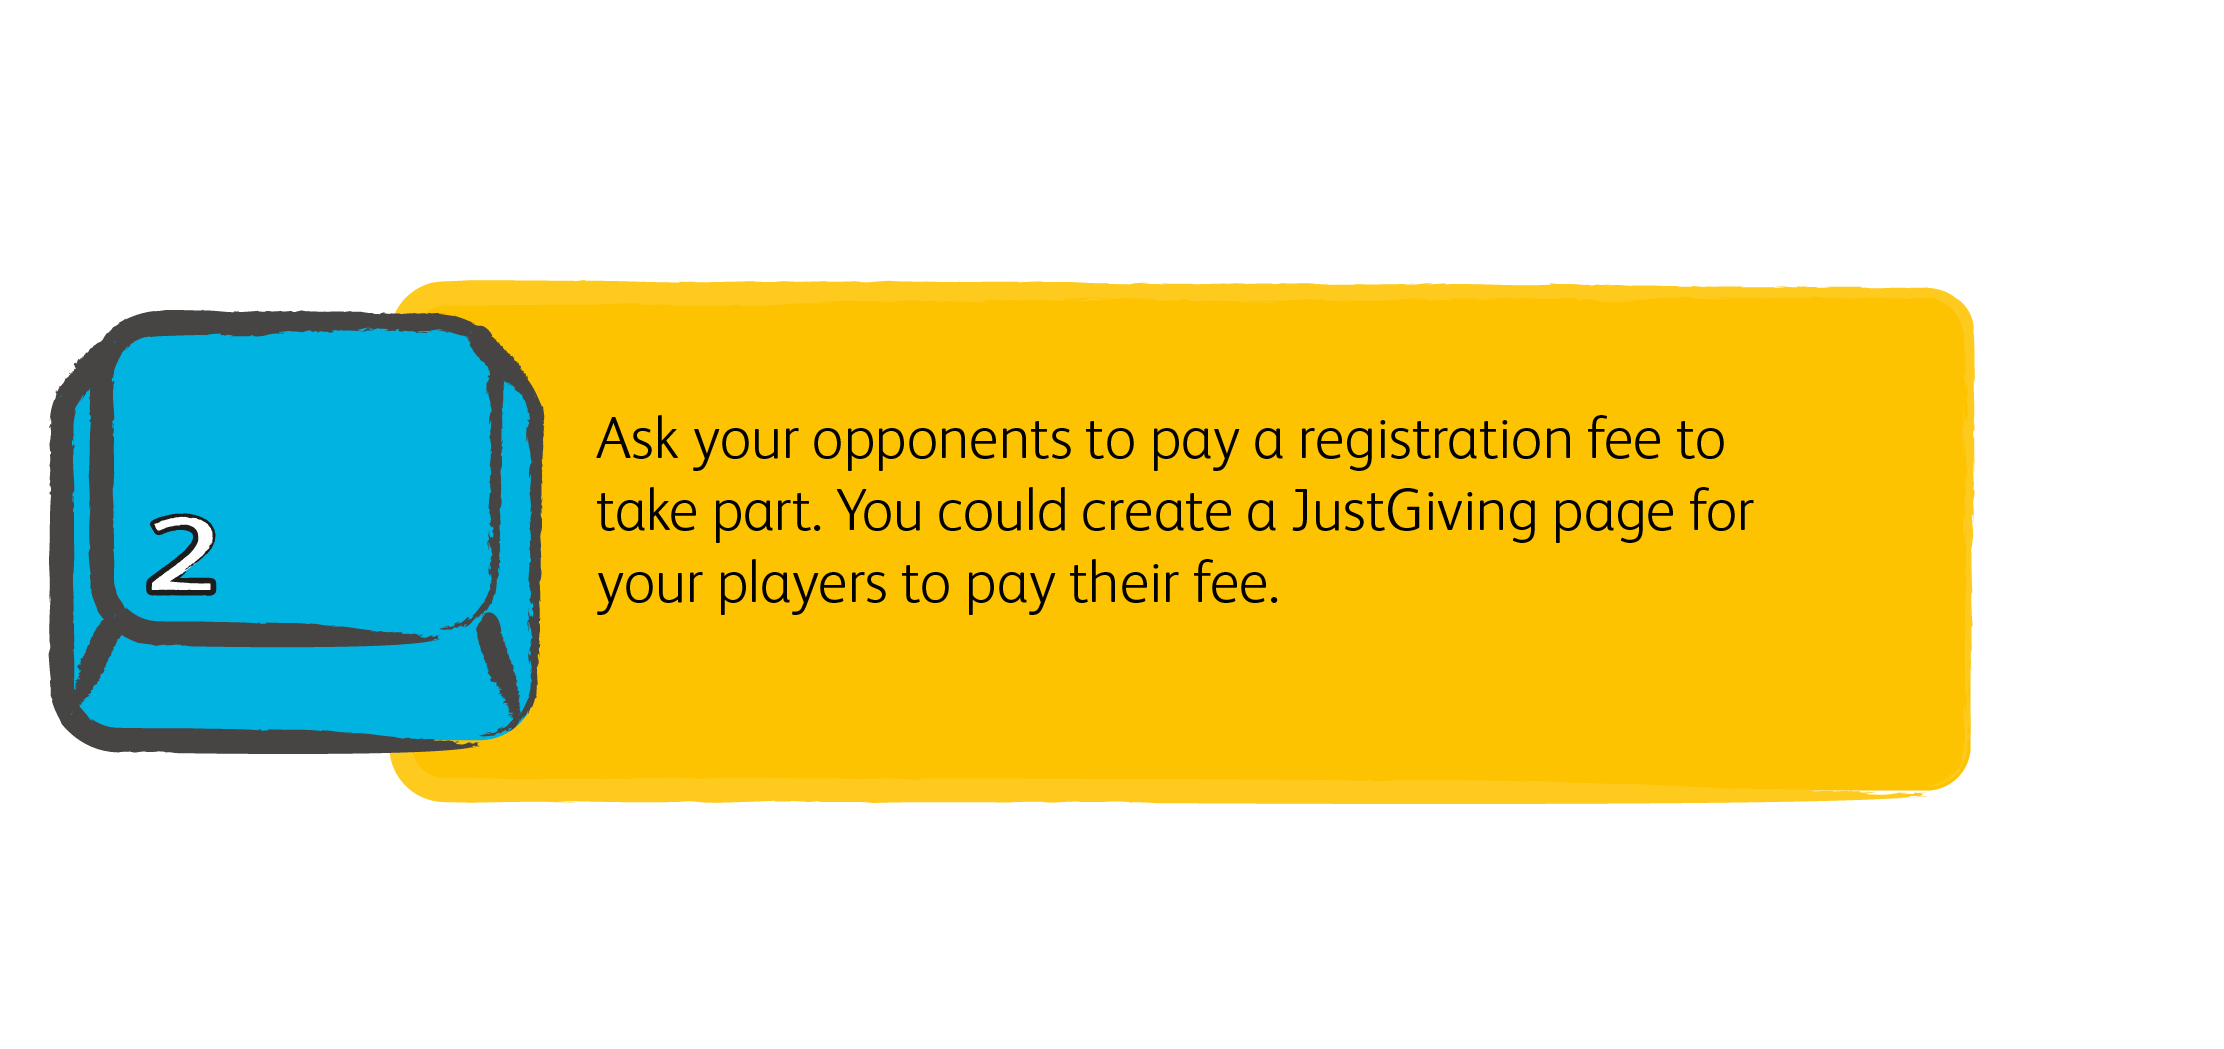 Ask your opponents to pay a registration fee to take part. You could create a JustGiving page for your players to pay their fee.